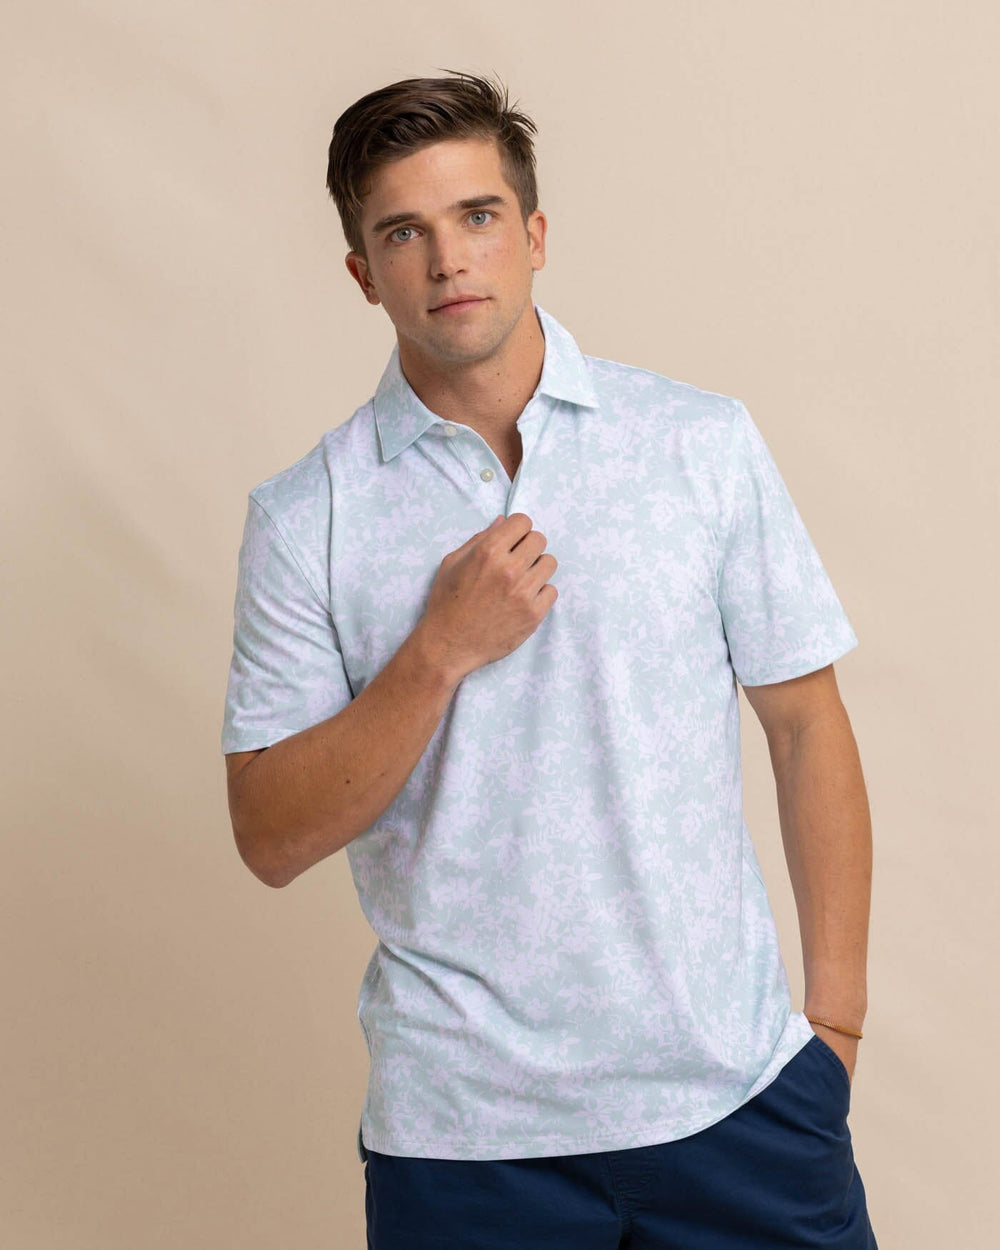 The front view of the Southern Tide Driver Island Blooms Printed Polo by Southern Tide - Surf Spray Sage